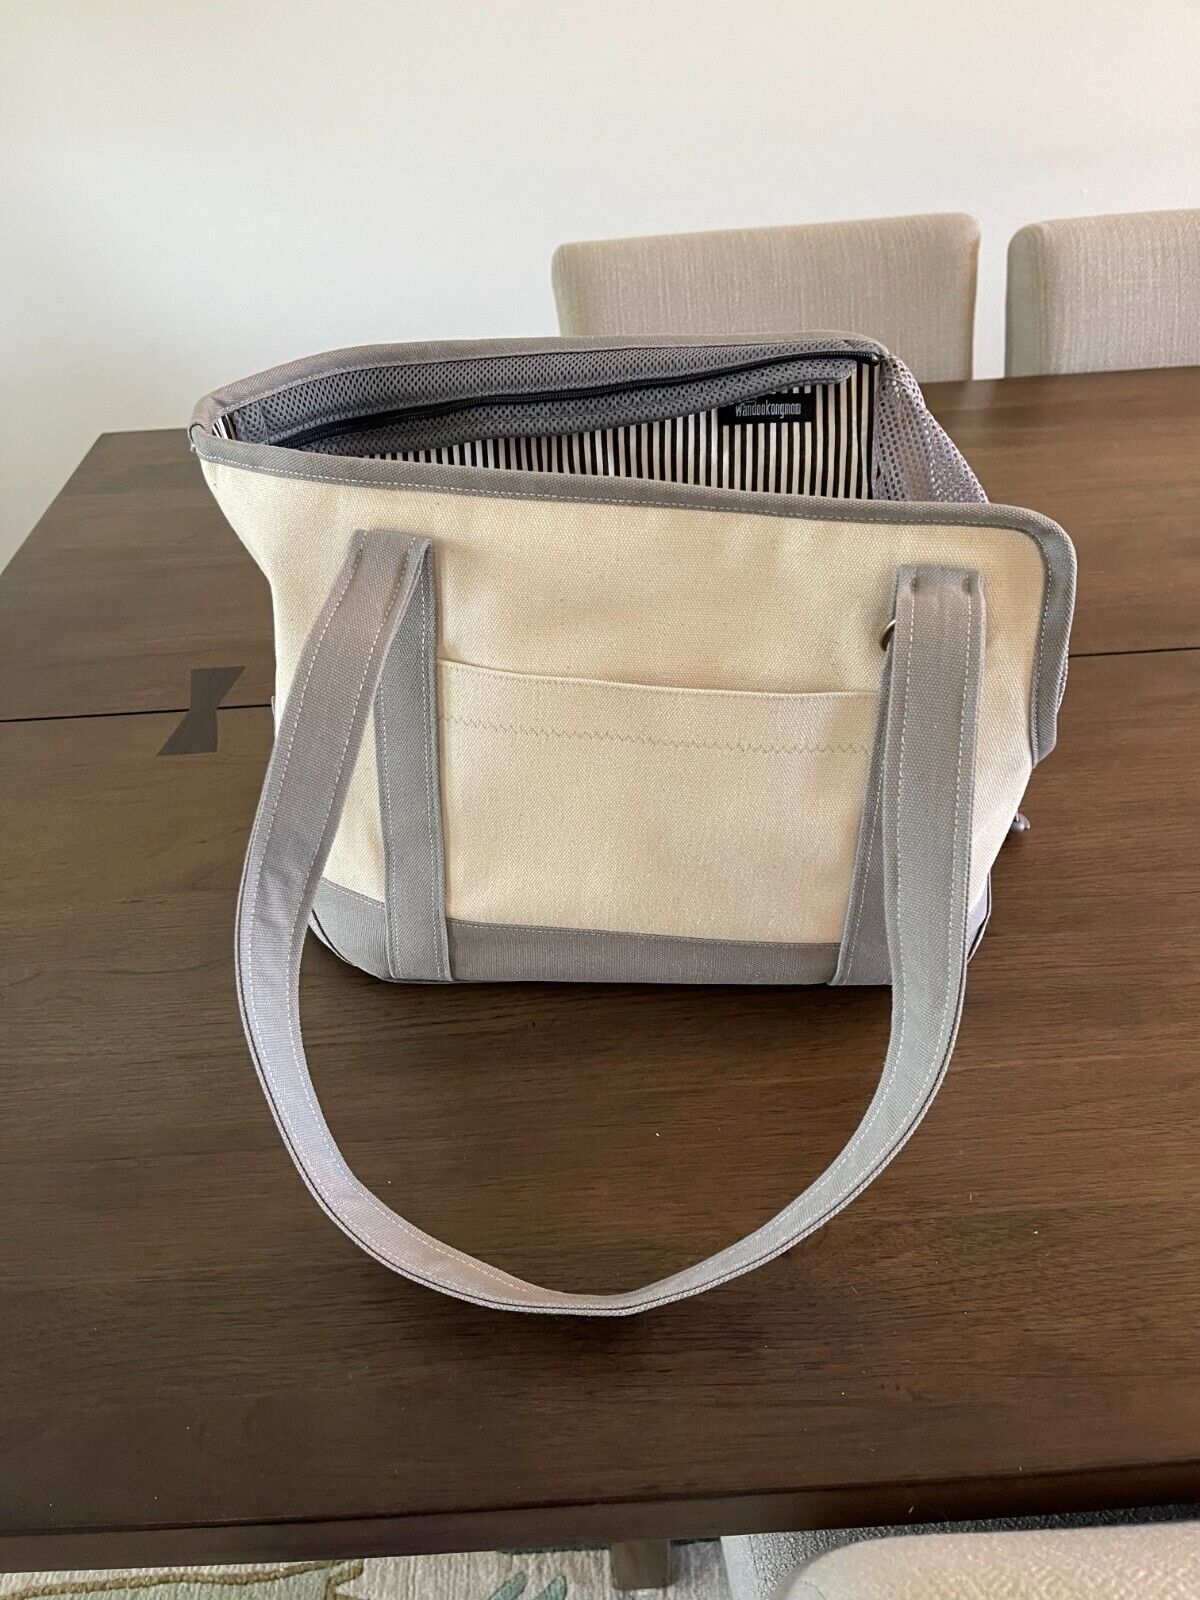 Dog Carrier/Tote